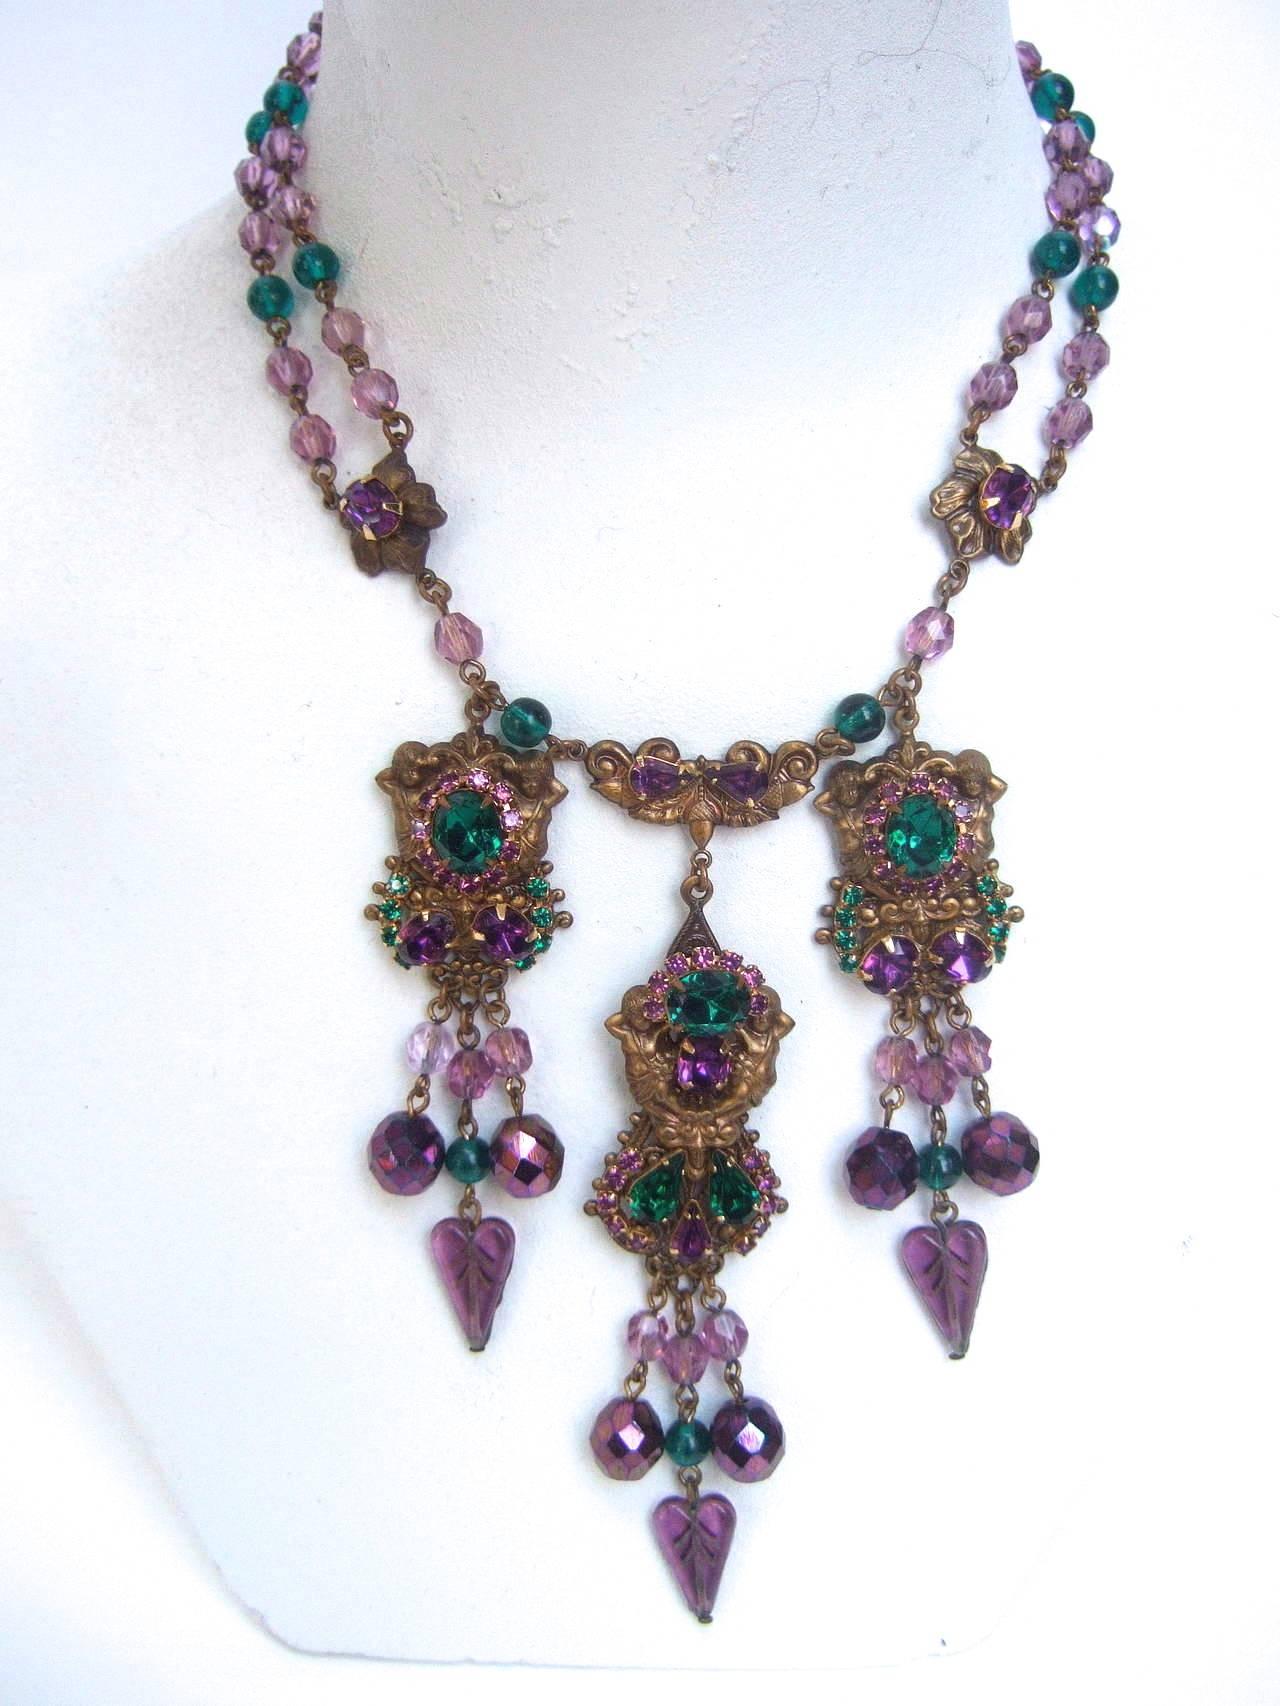 
Exquisite crystal jeweled tiered necklace  c1950's.

This romantic necklace is encrusted with a glittering collage of
emerald green and amethyst faceted crystals.

The center of this extraordinary necklace is designed with three dangling